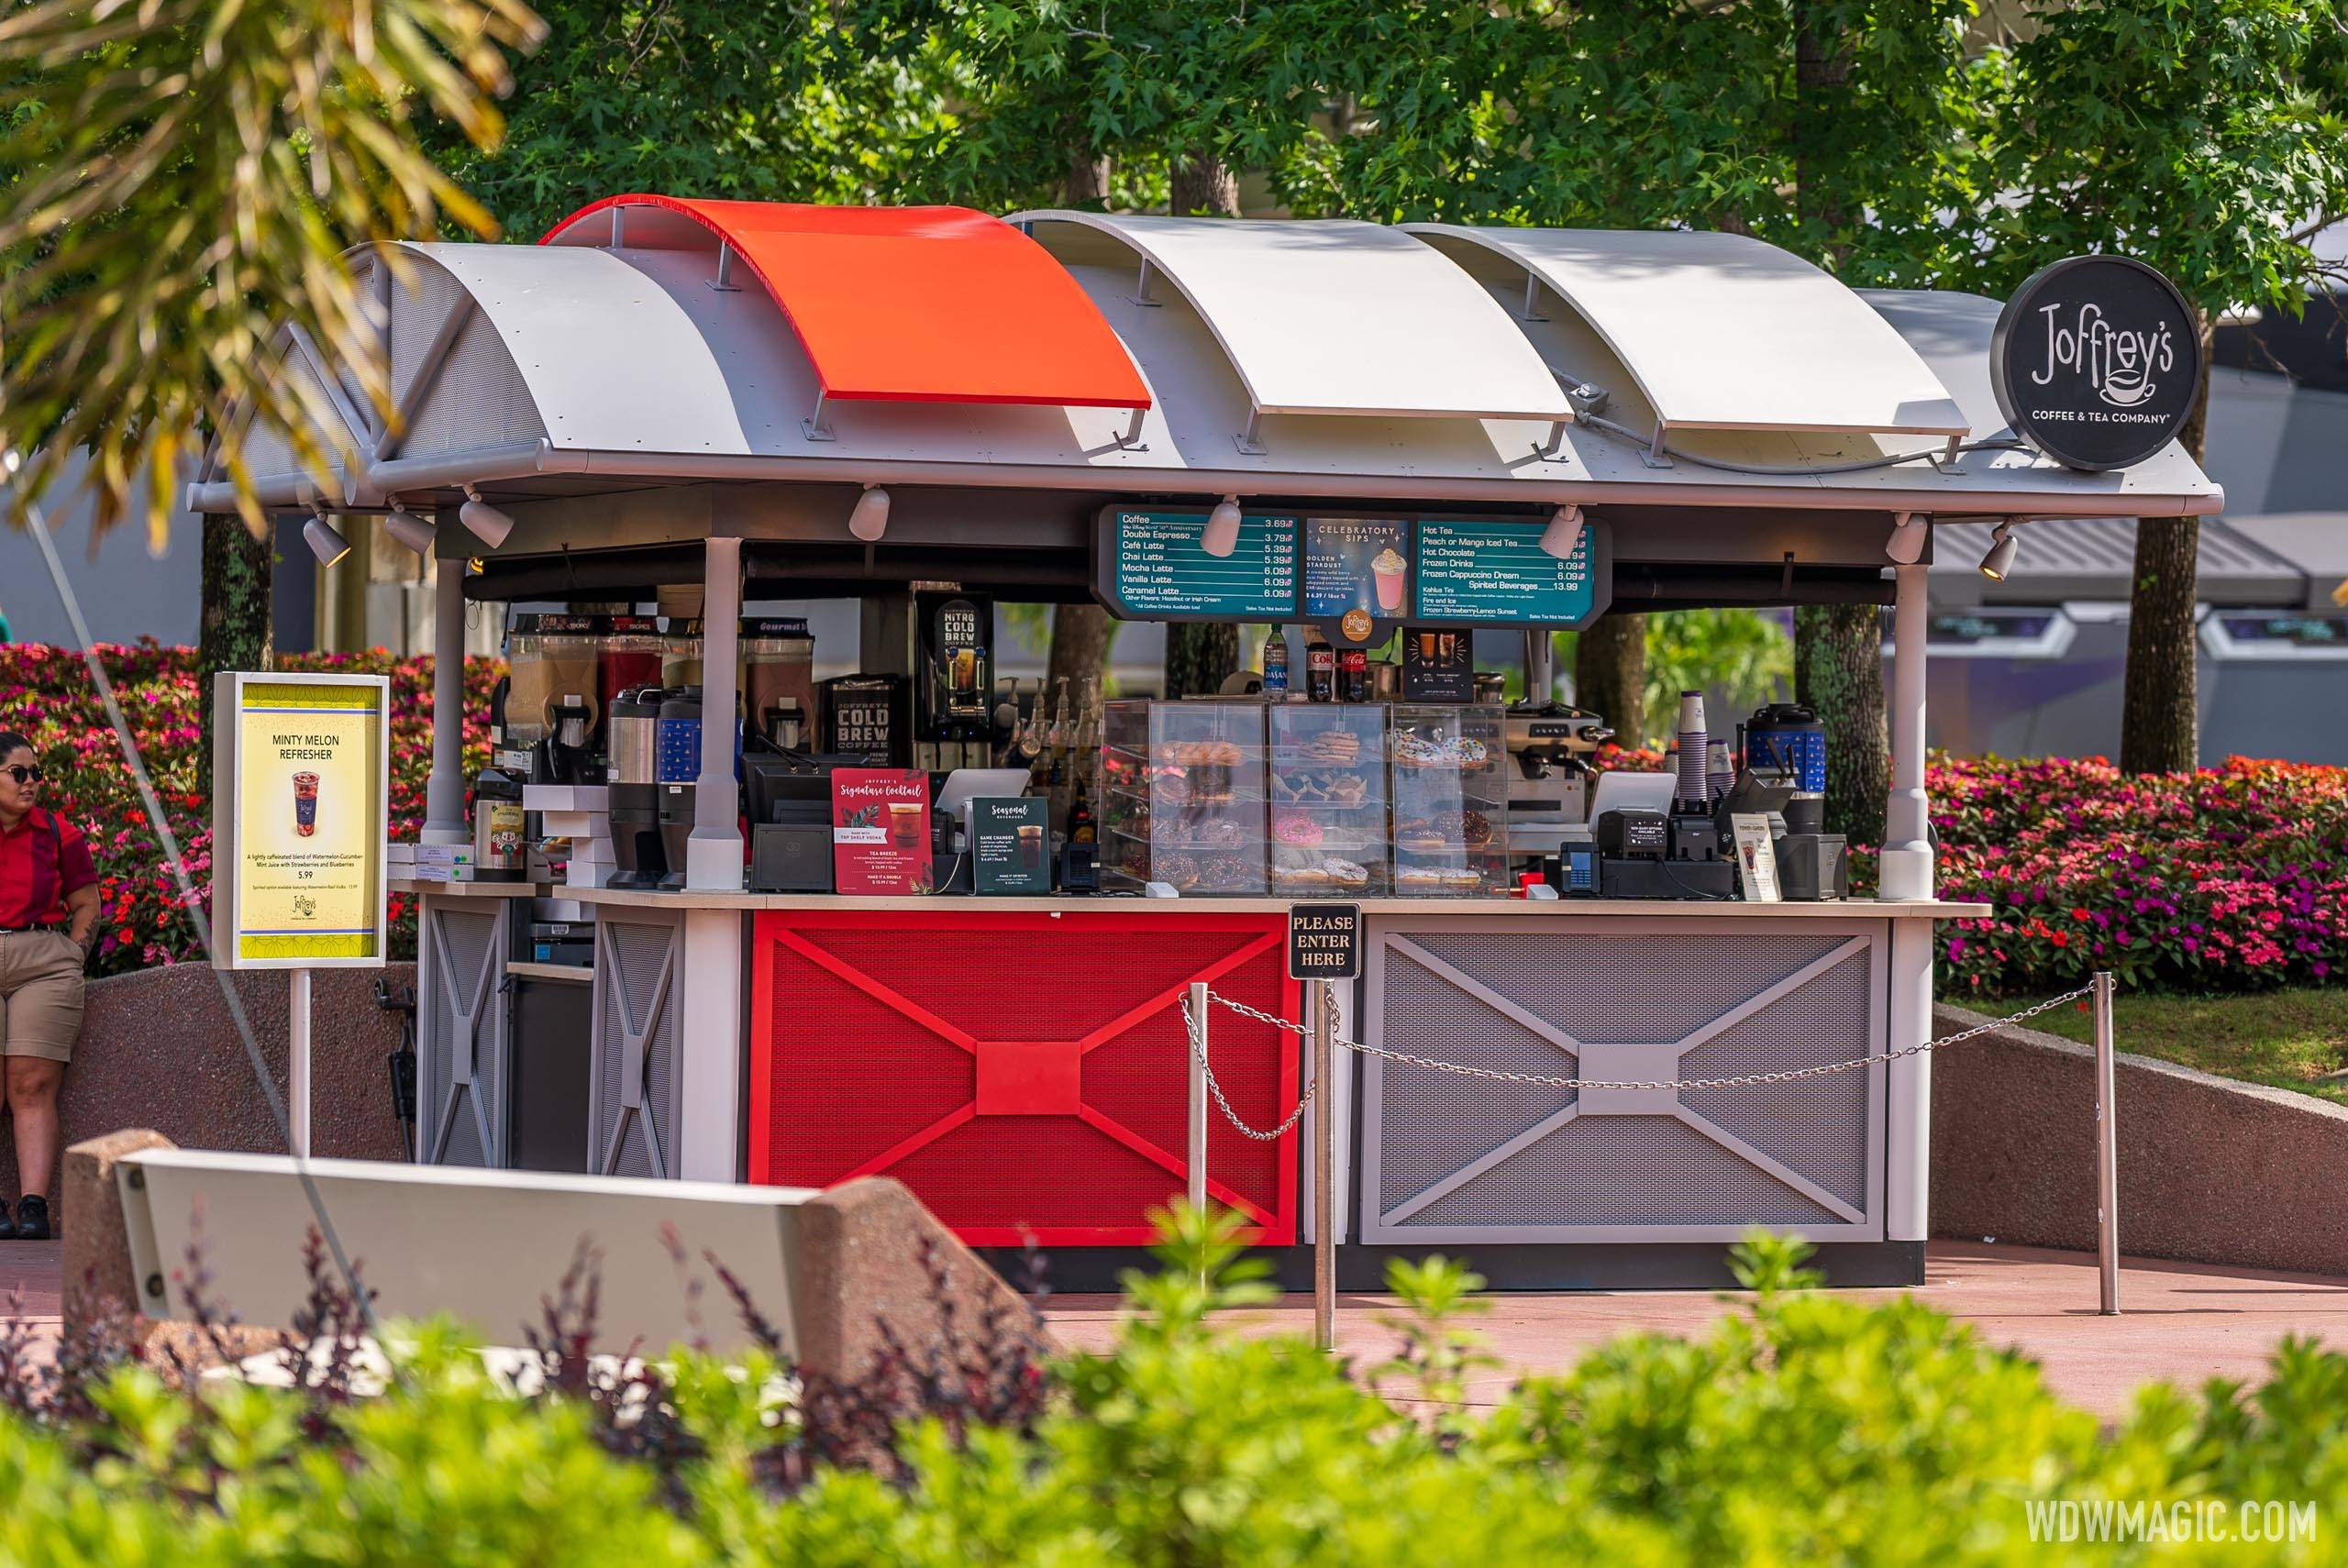 Joffrey's coffee kiosk gets an updated look in EPCOT's World Discovery